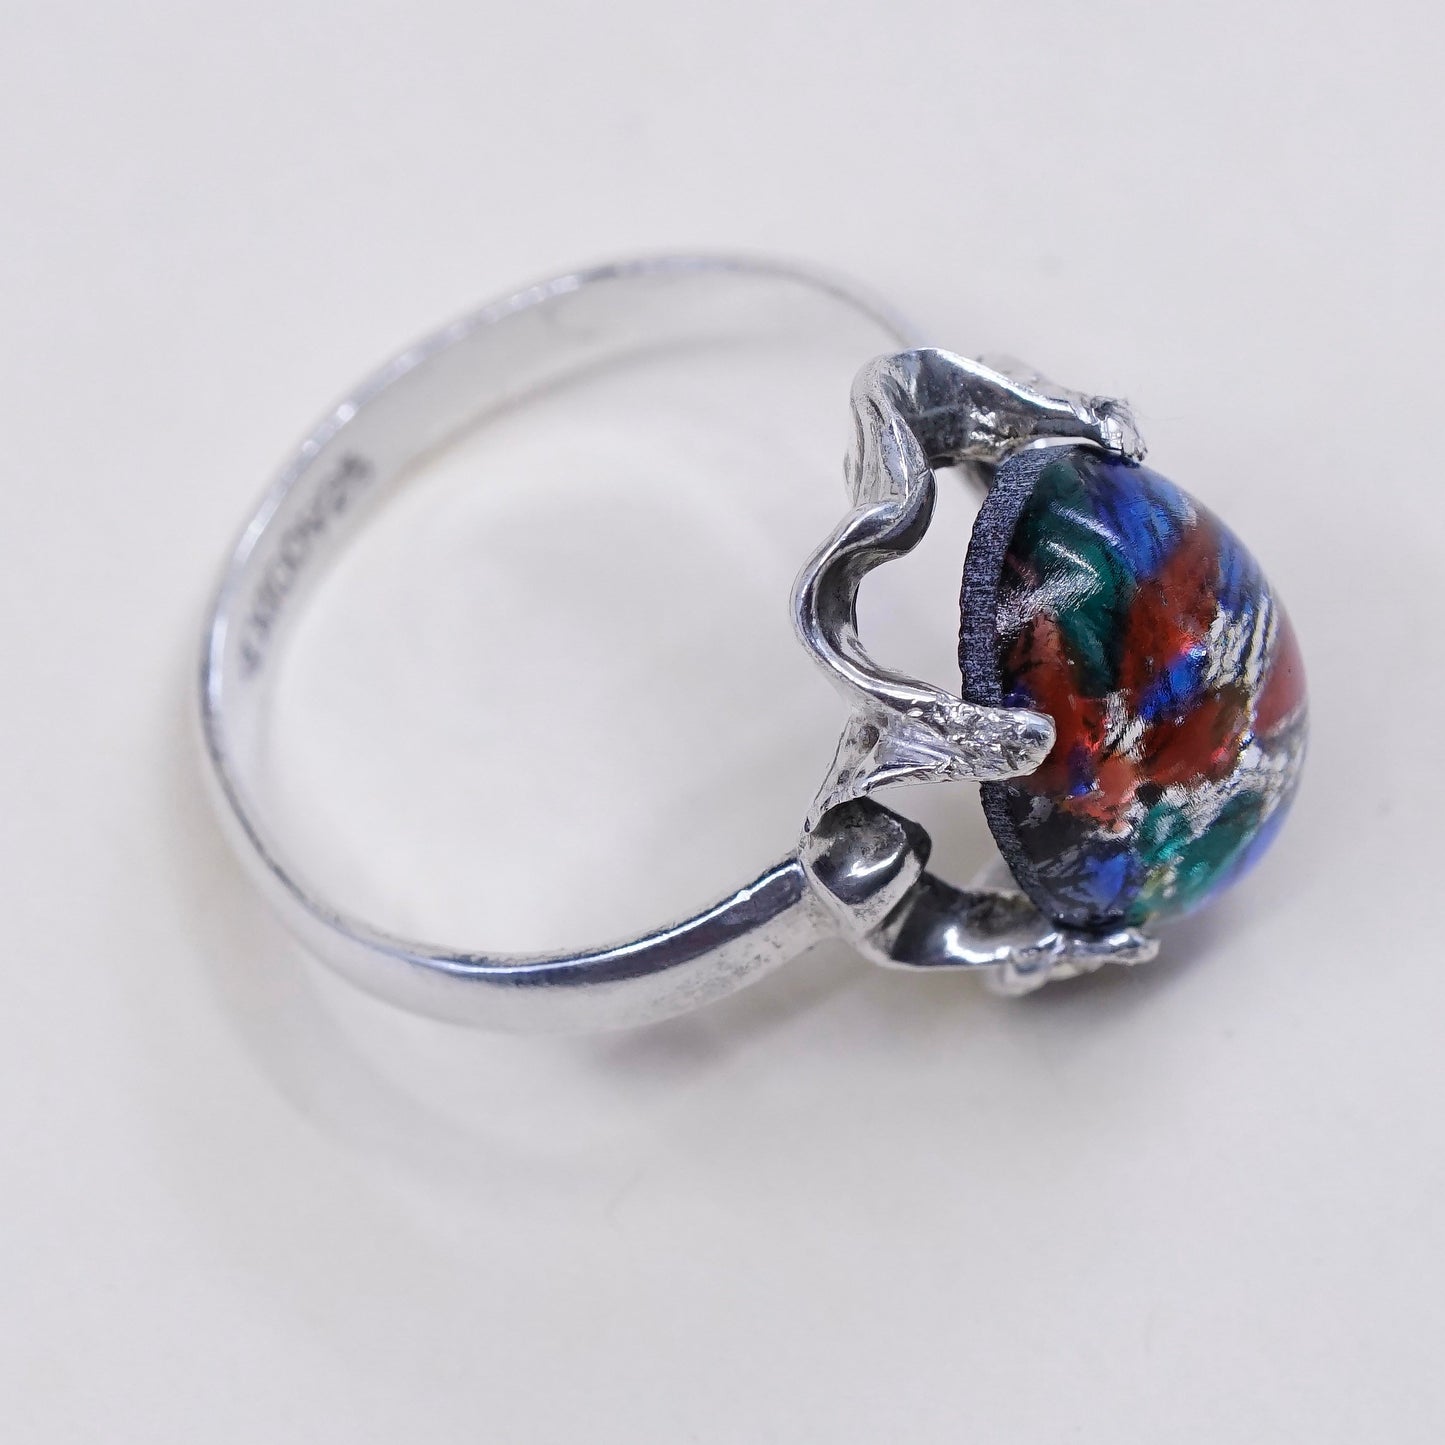 Size 9, vintage mexico sterling 925 silver handmade crown ring w/ foiled glass